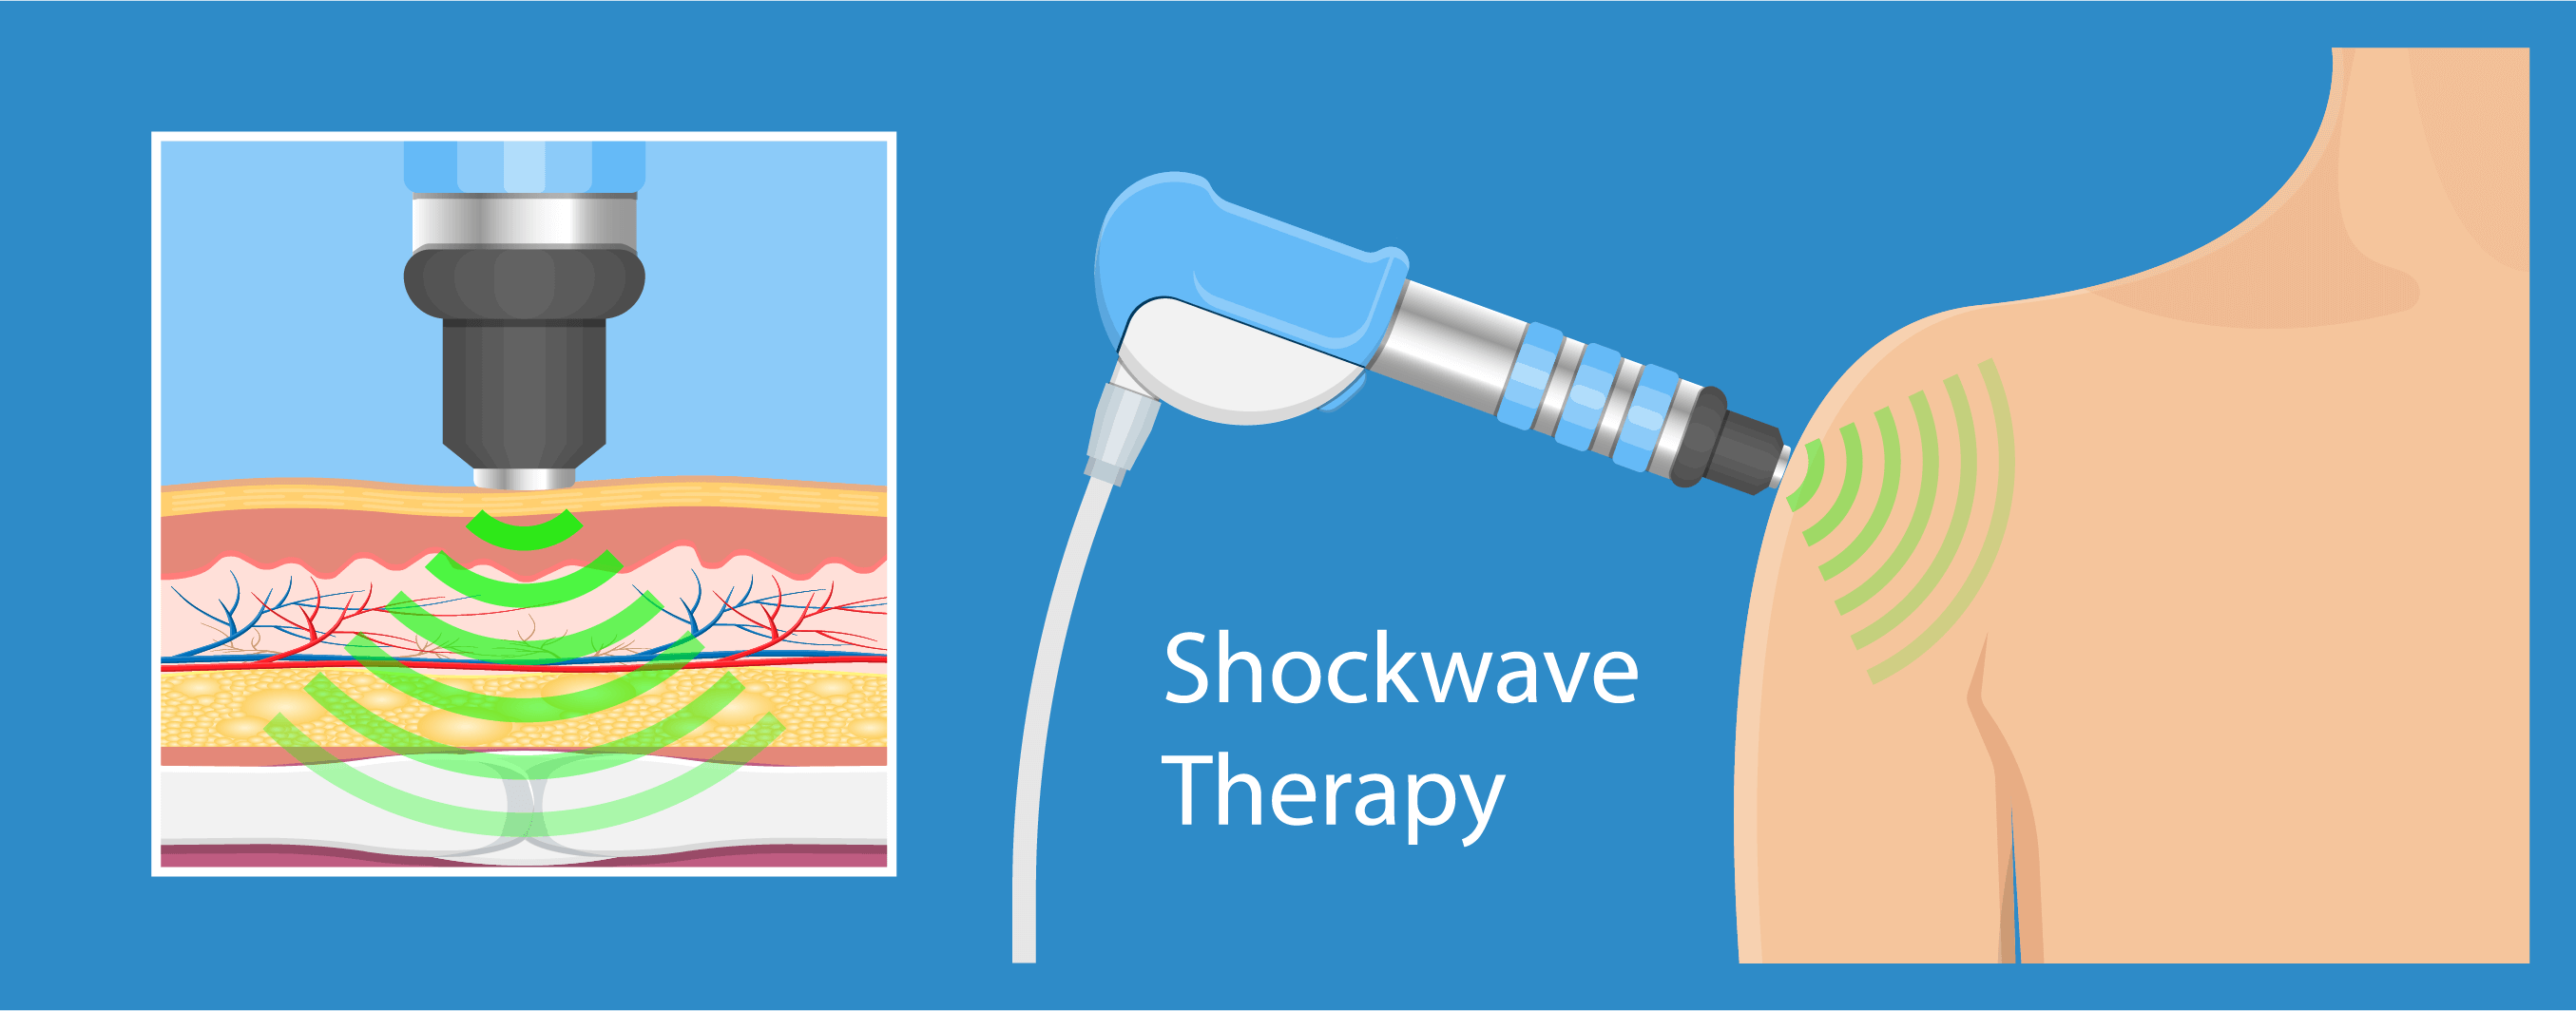 Shockwave therapy SWT physiotherapist treat muscular disorder back neck physical tennis Elbow muscle stimulator ultrasound calcific tendonitis